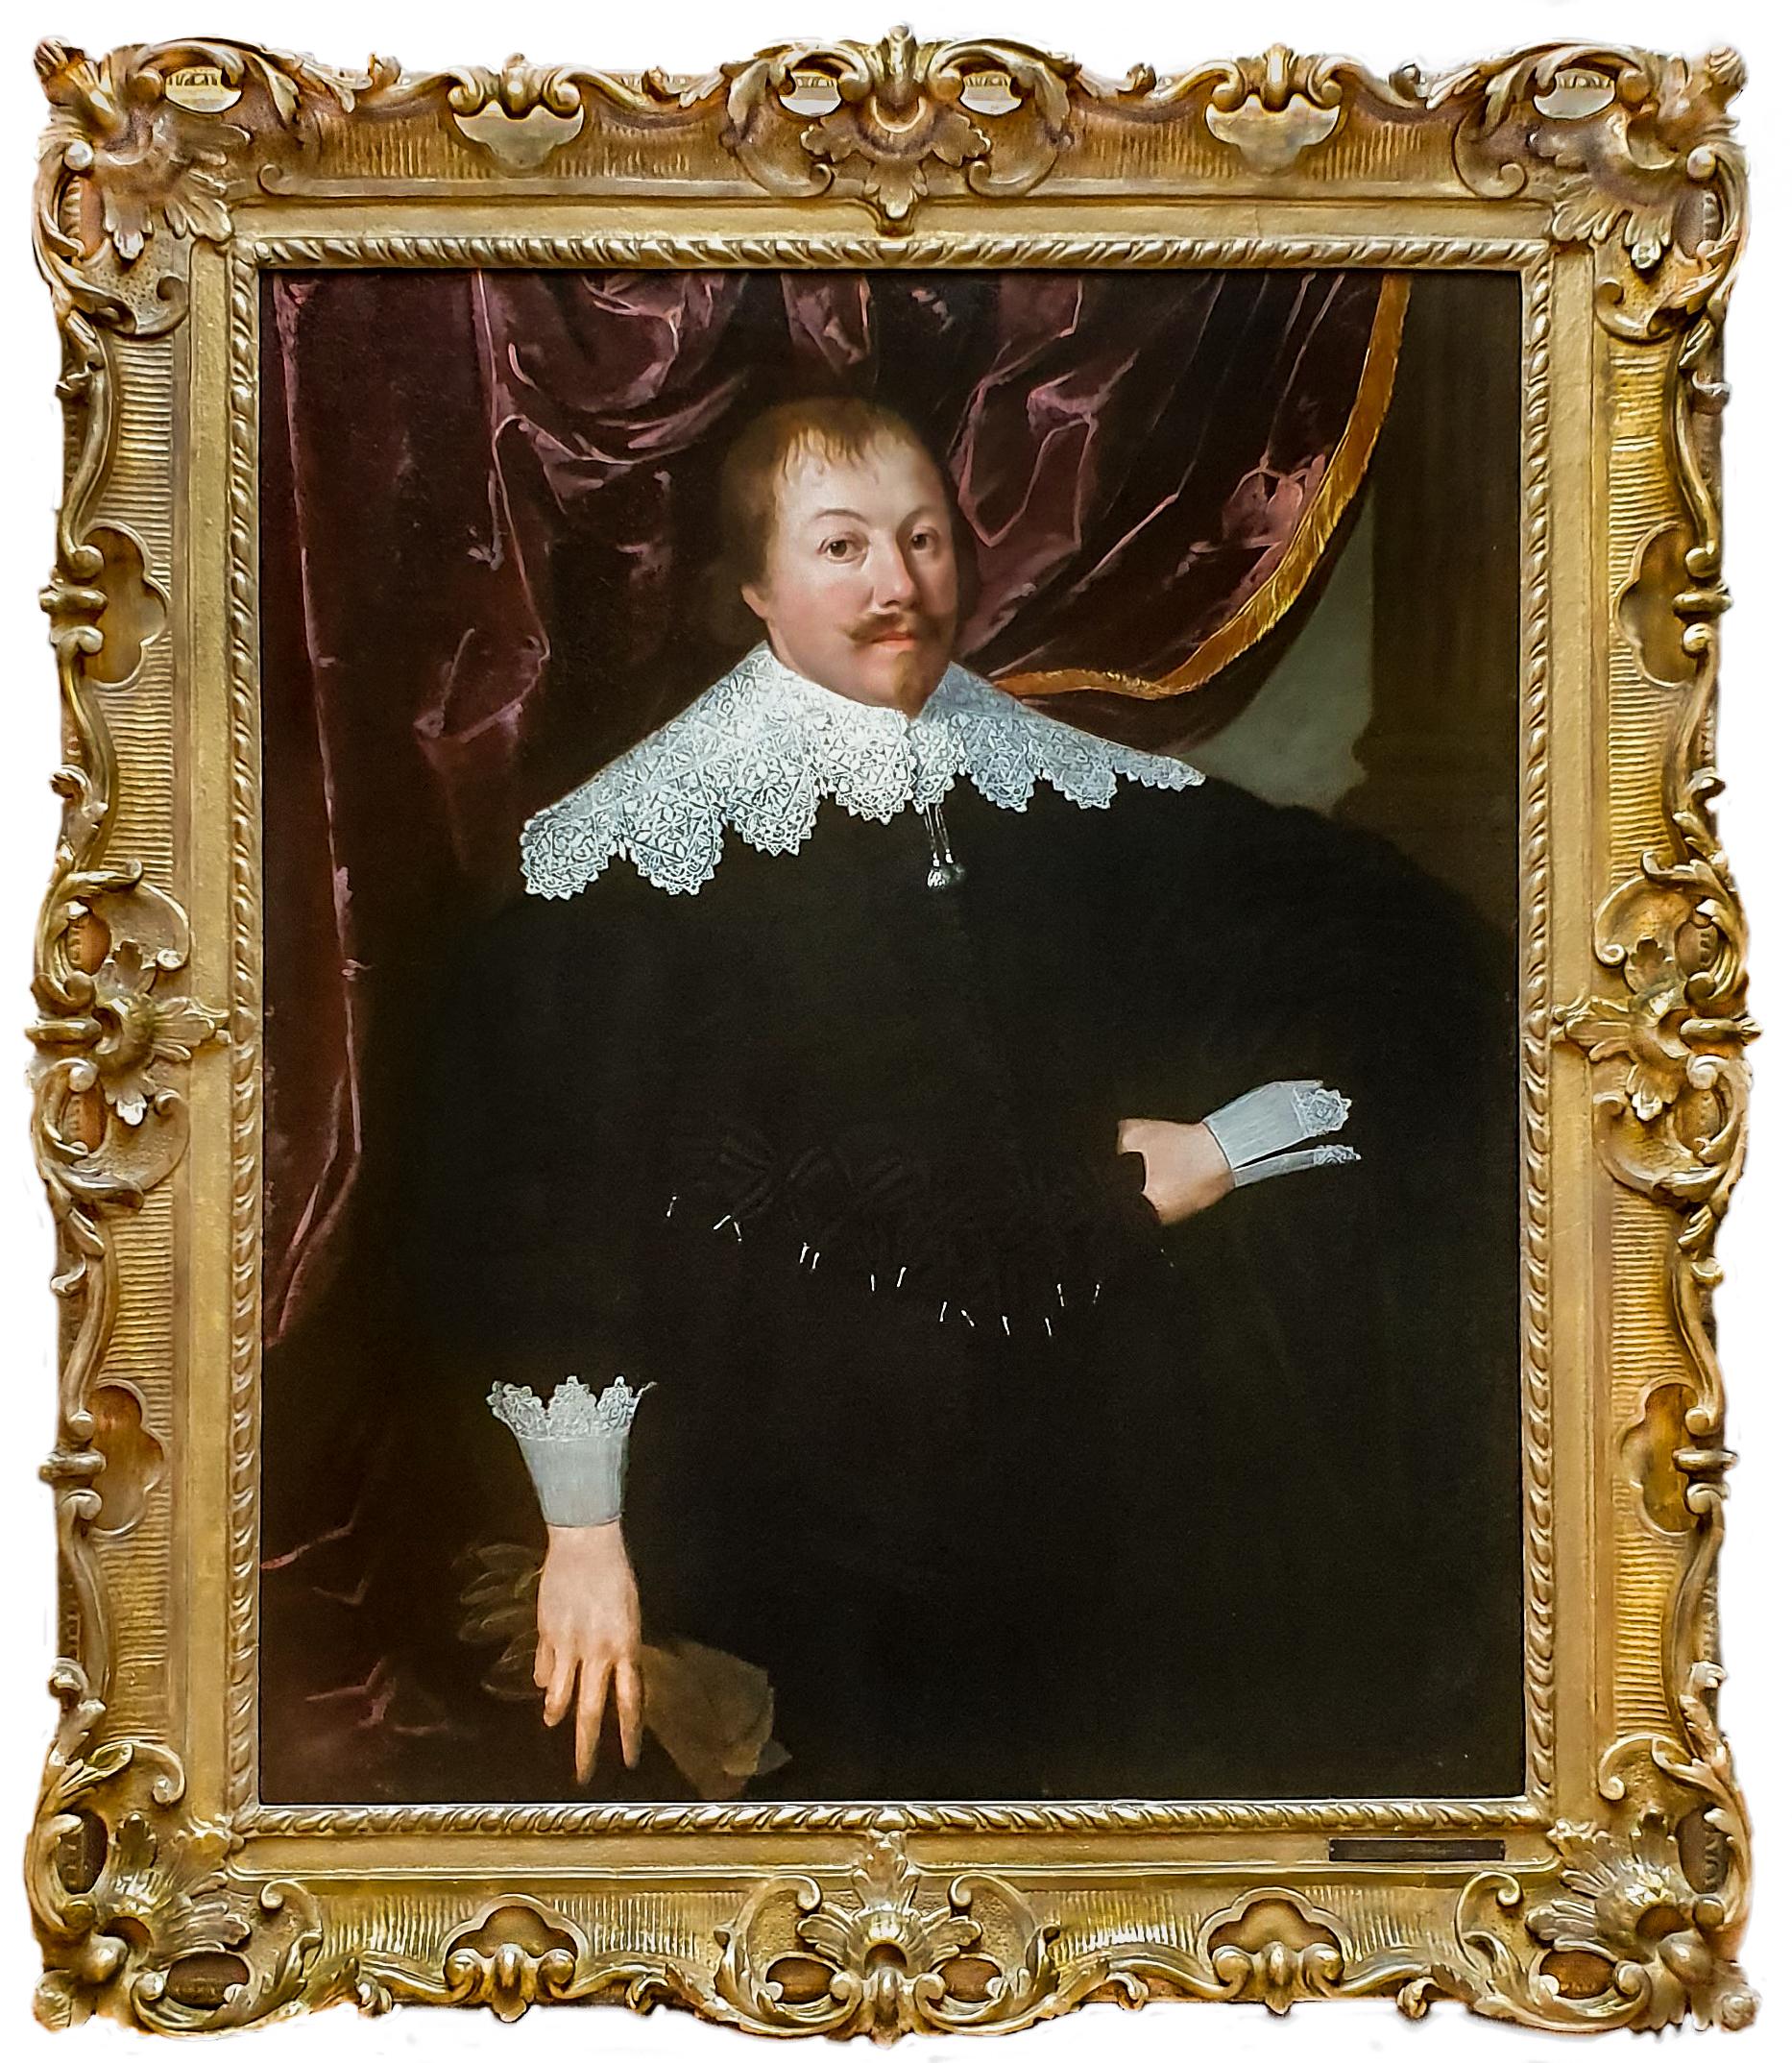 (Attributed to) Huygh Pietersz. Voskuyl  Portrait Painting - Portrait of a Gentleman holding a Pair of Gloves, Rare example of artist's work